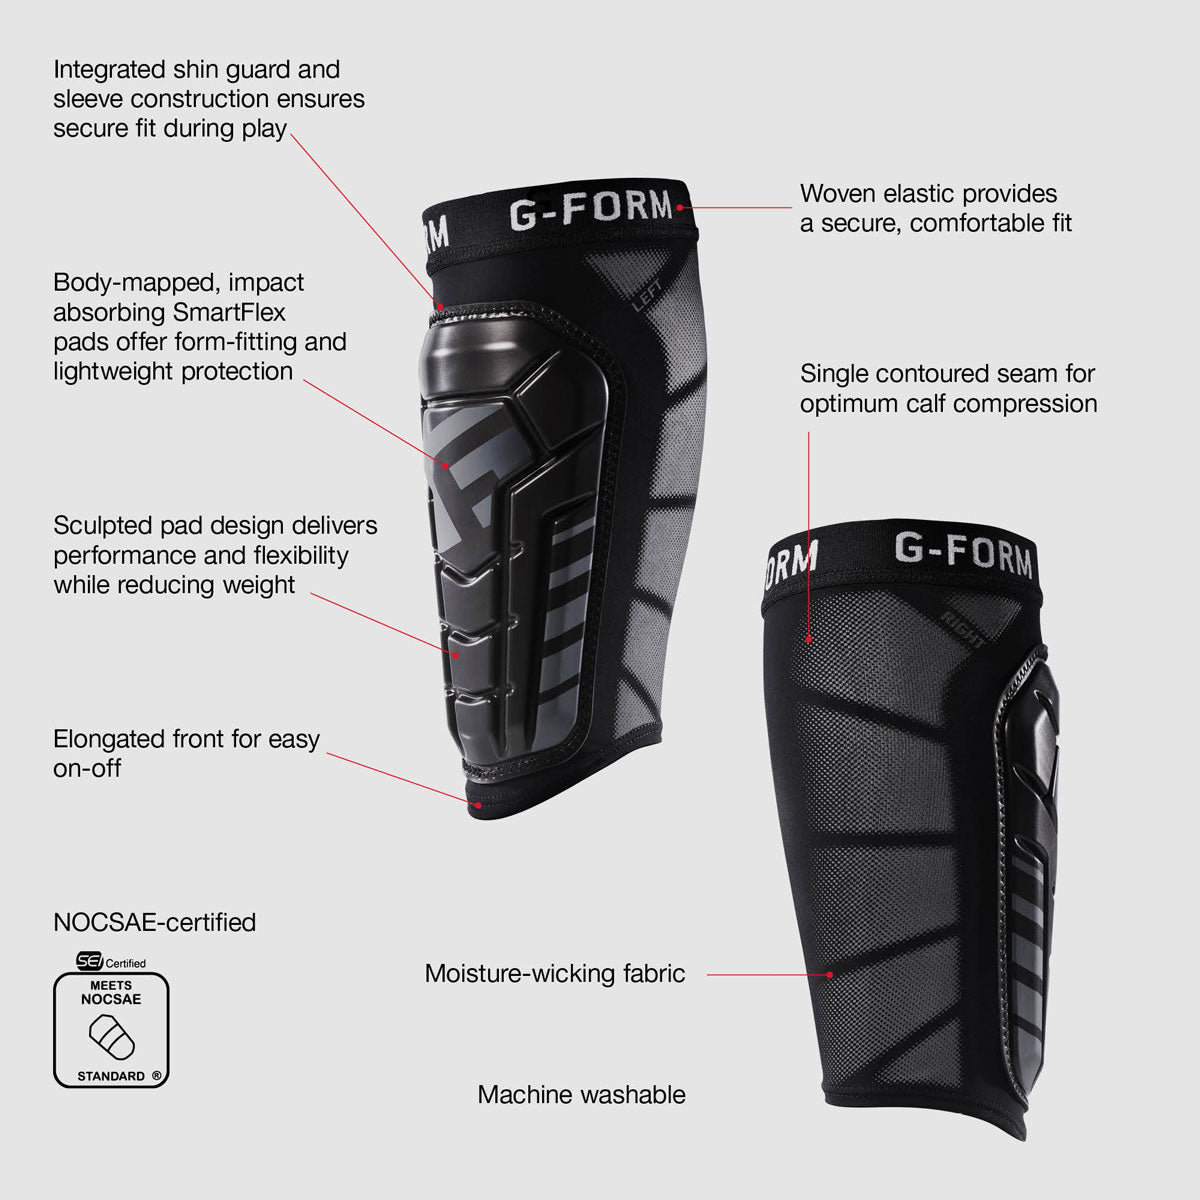 Vento Soccer Shin Guards Flexible Machine Washable lightweight Protection Shin Pad features